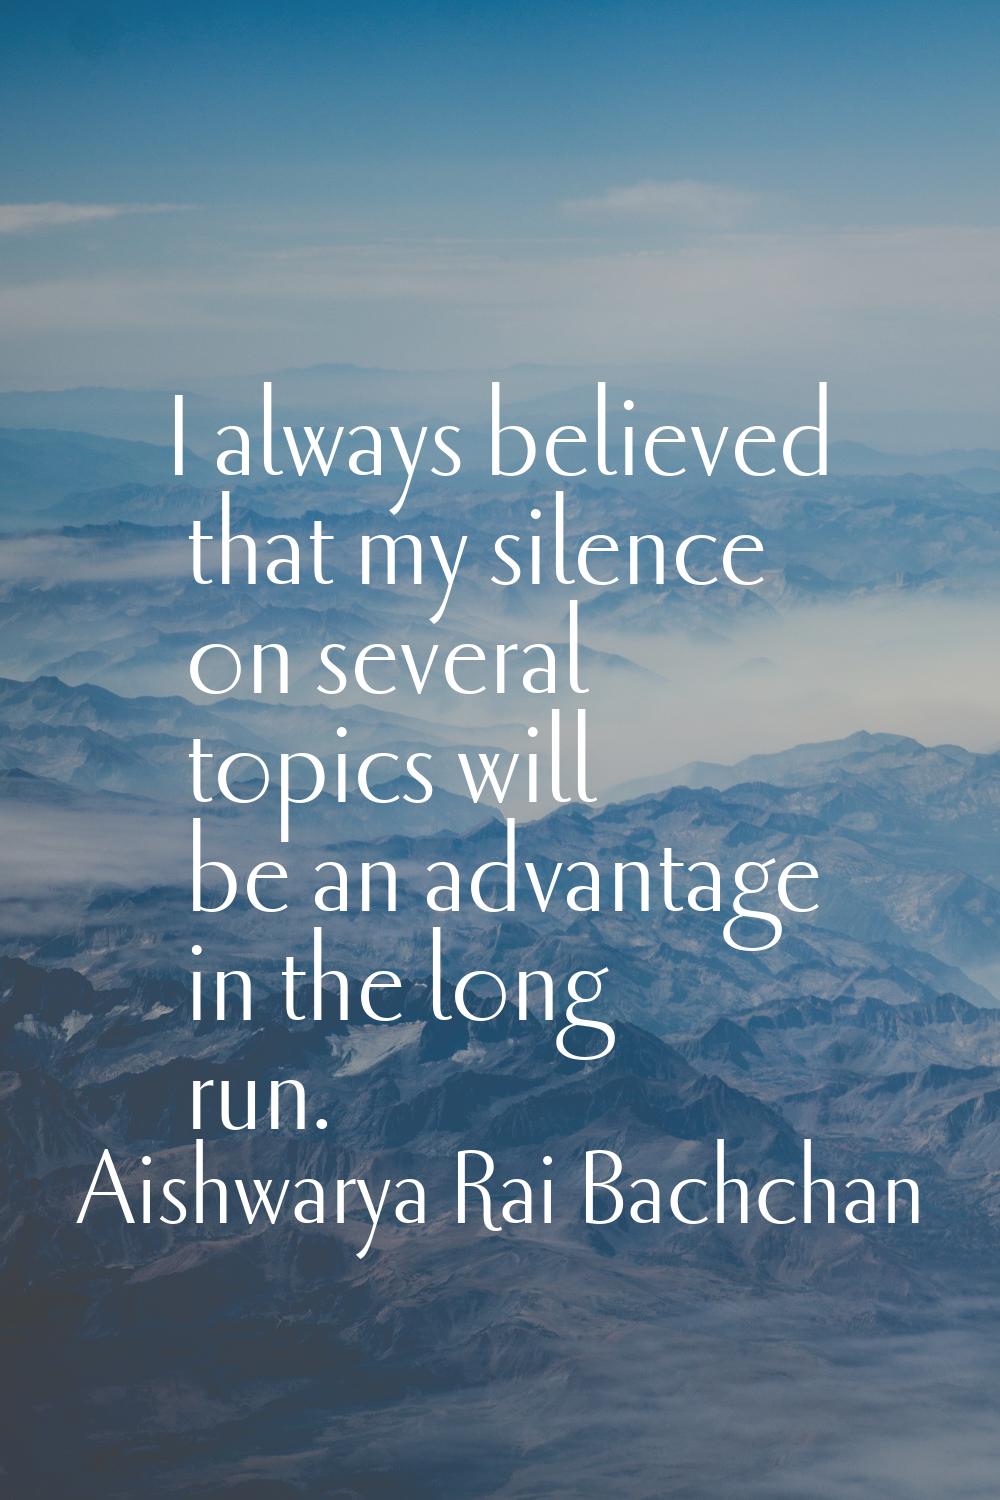 I always believed that my silence on several topics will be an advantage in the long run.